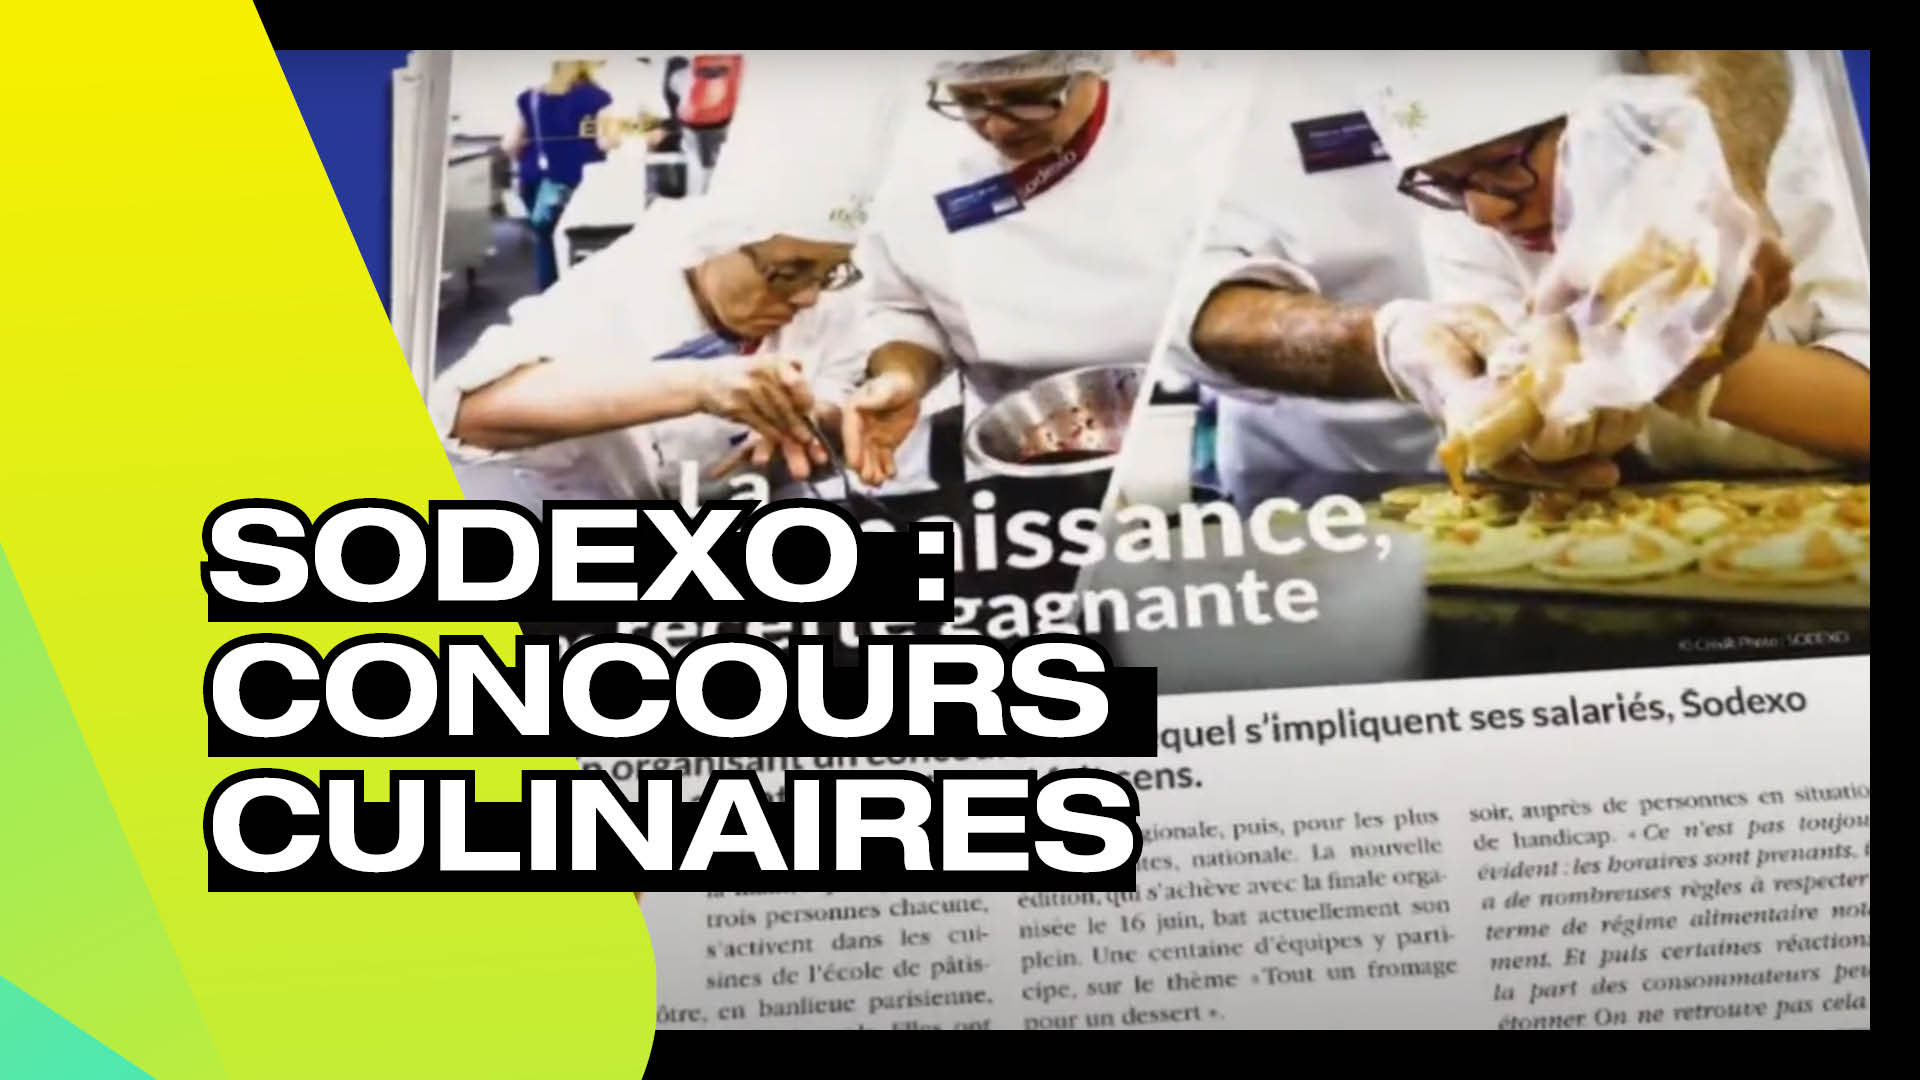 SODEXO - Concours culinaires